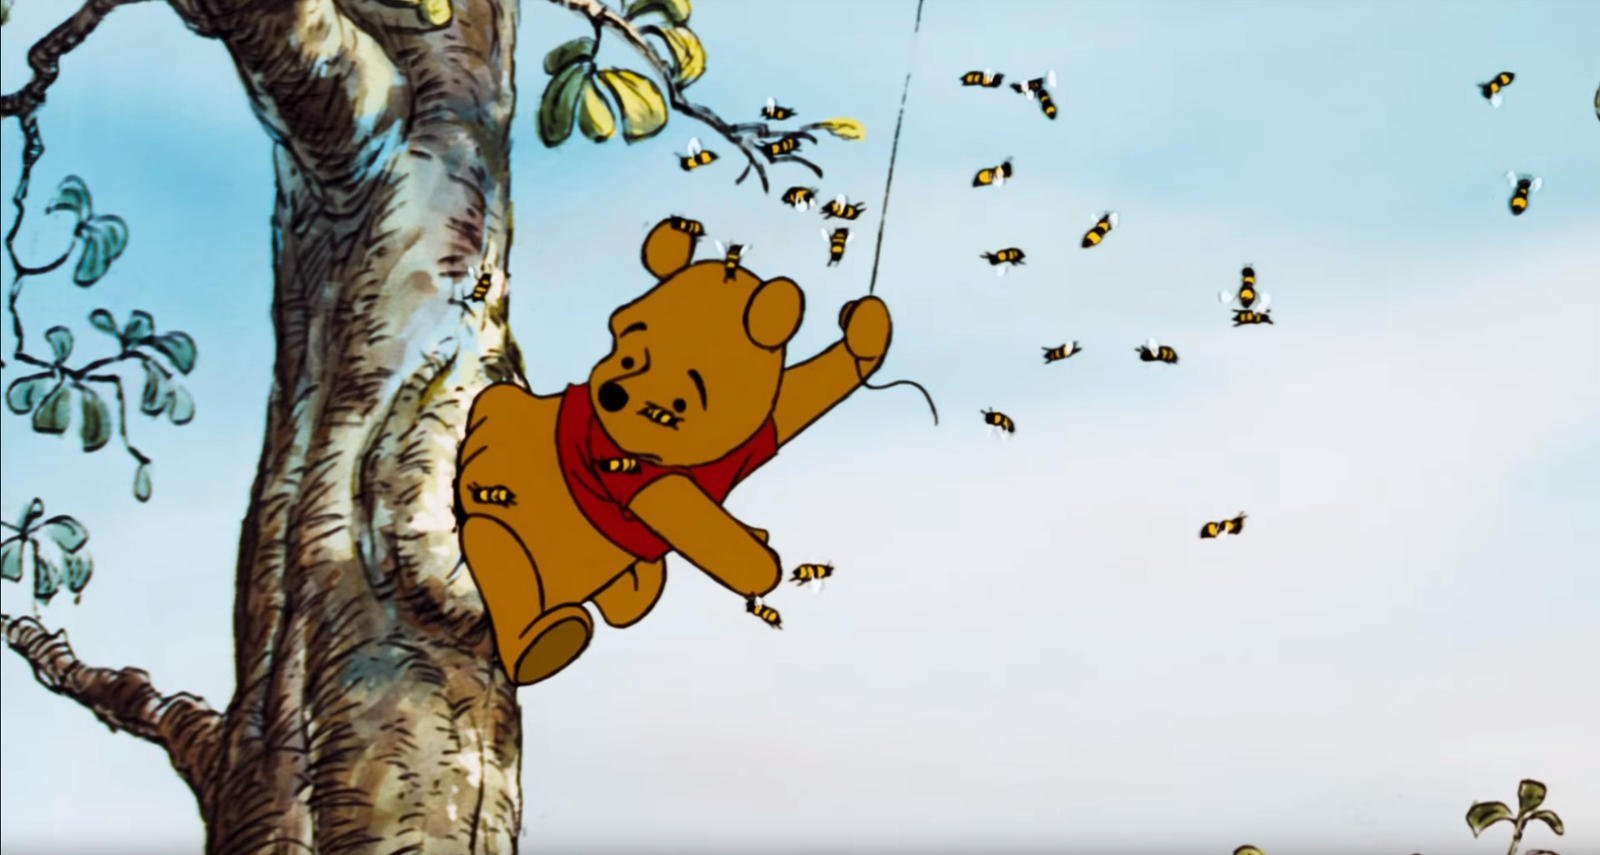 The Original Voices of the Winnie the Pooh Characters — The Disney Classics